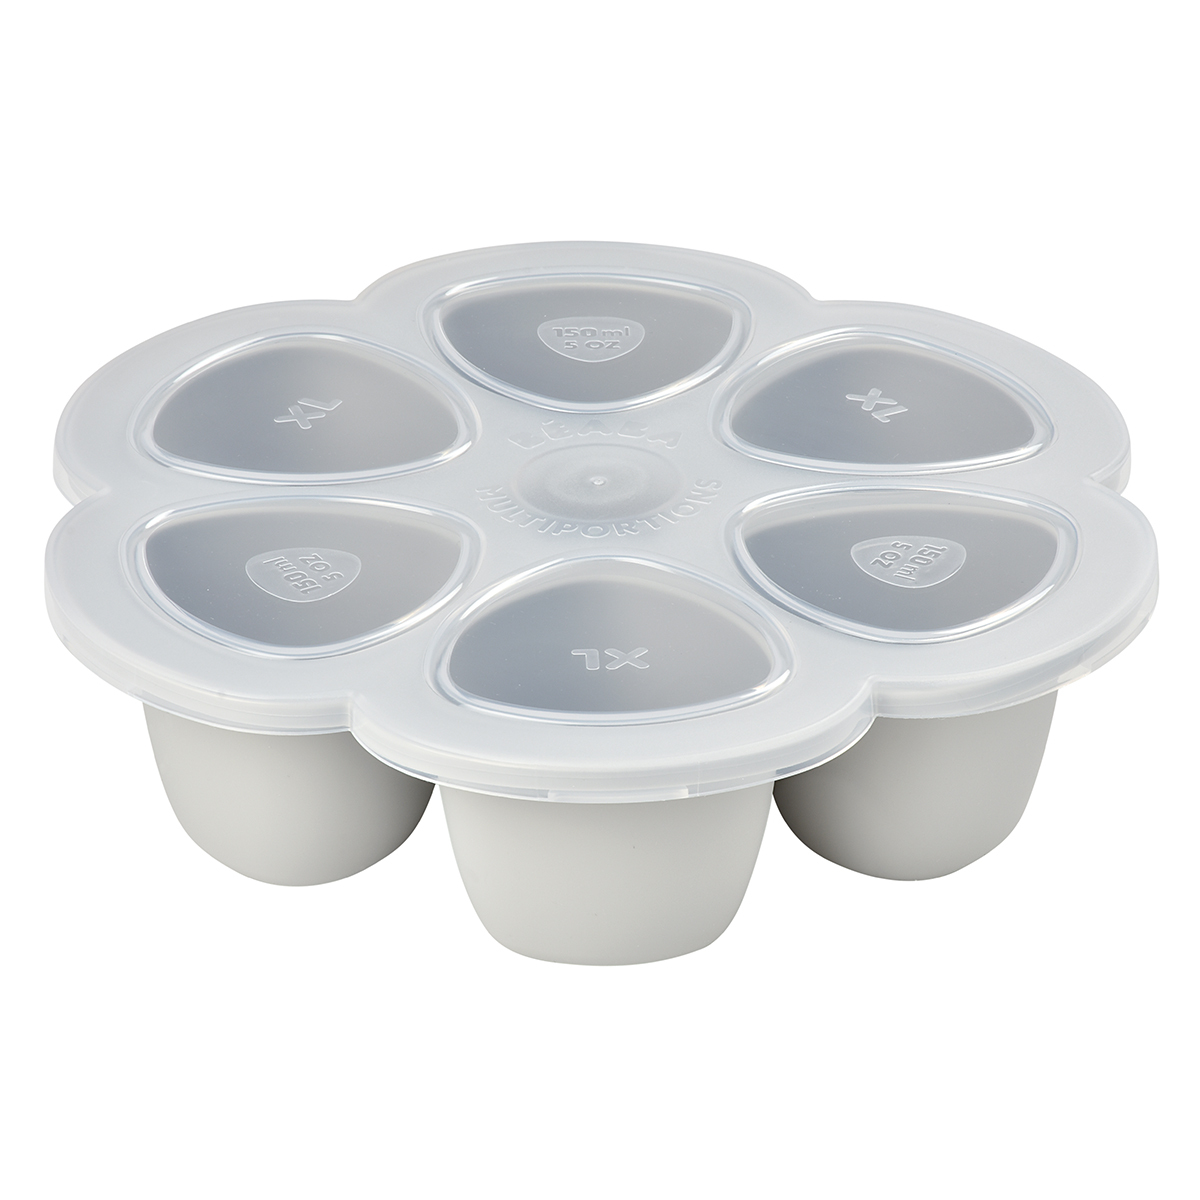 Vaisselle & Couvert Multiportions Silicone 6 x 150 ml - Light Mist Multiportions Silicone 6 x 150 ml - Light Mist